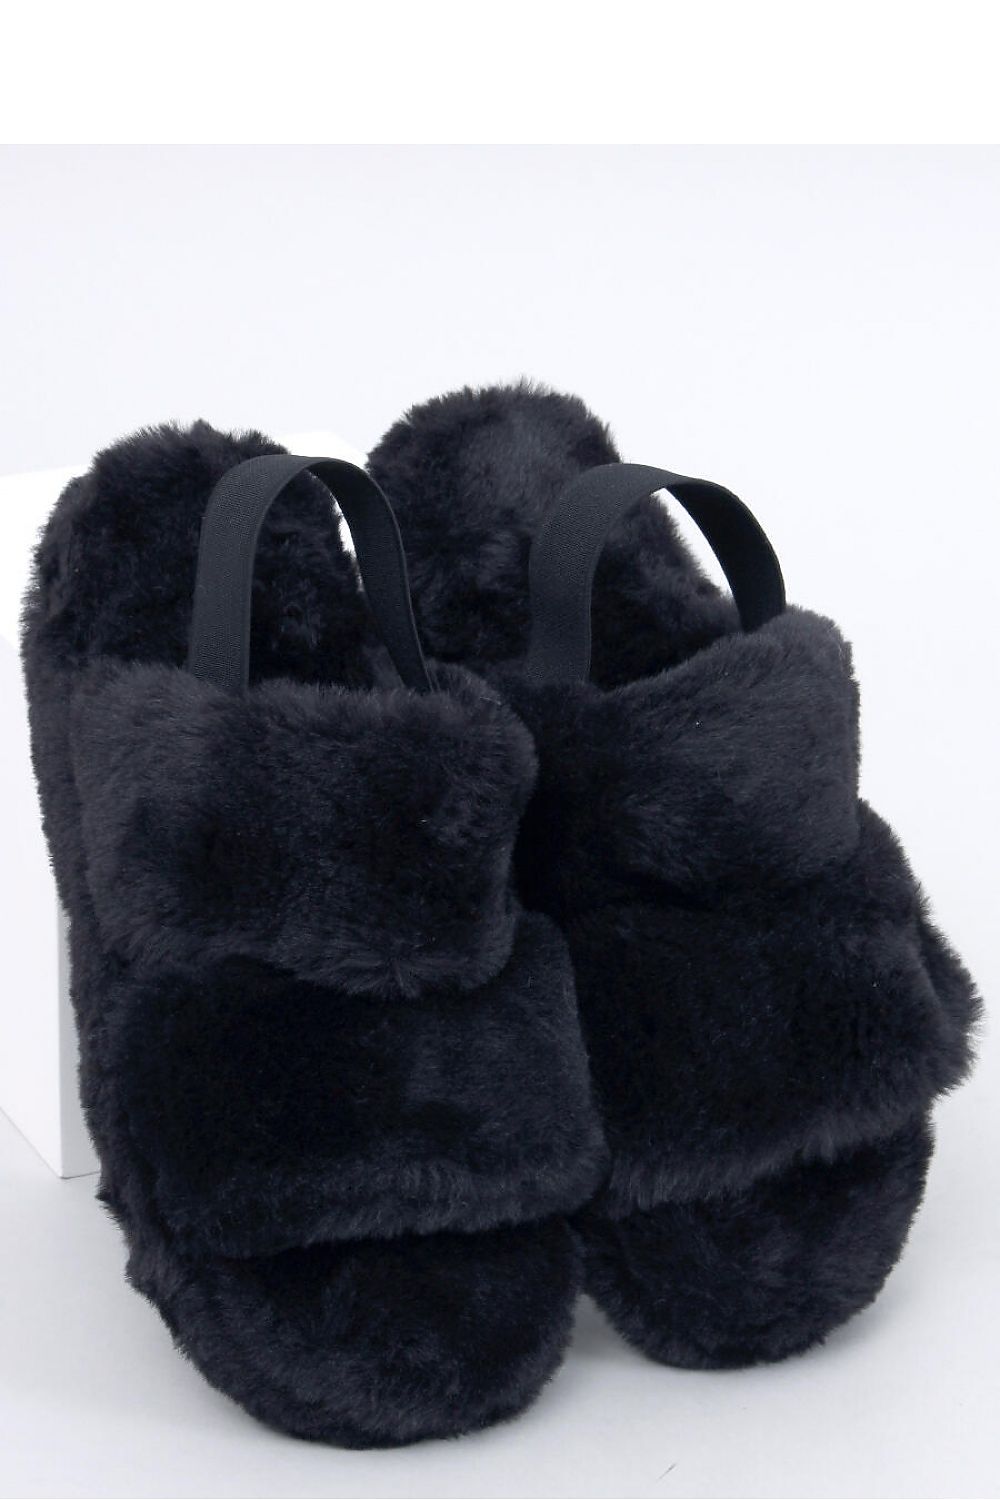 Back Up Fuzzy Slippers with Stretchy Heel Strap- Black